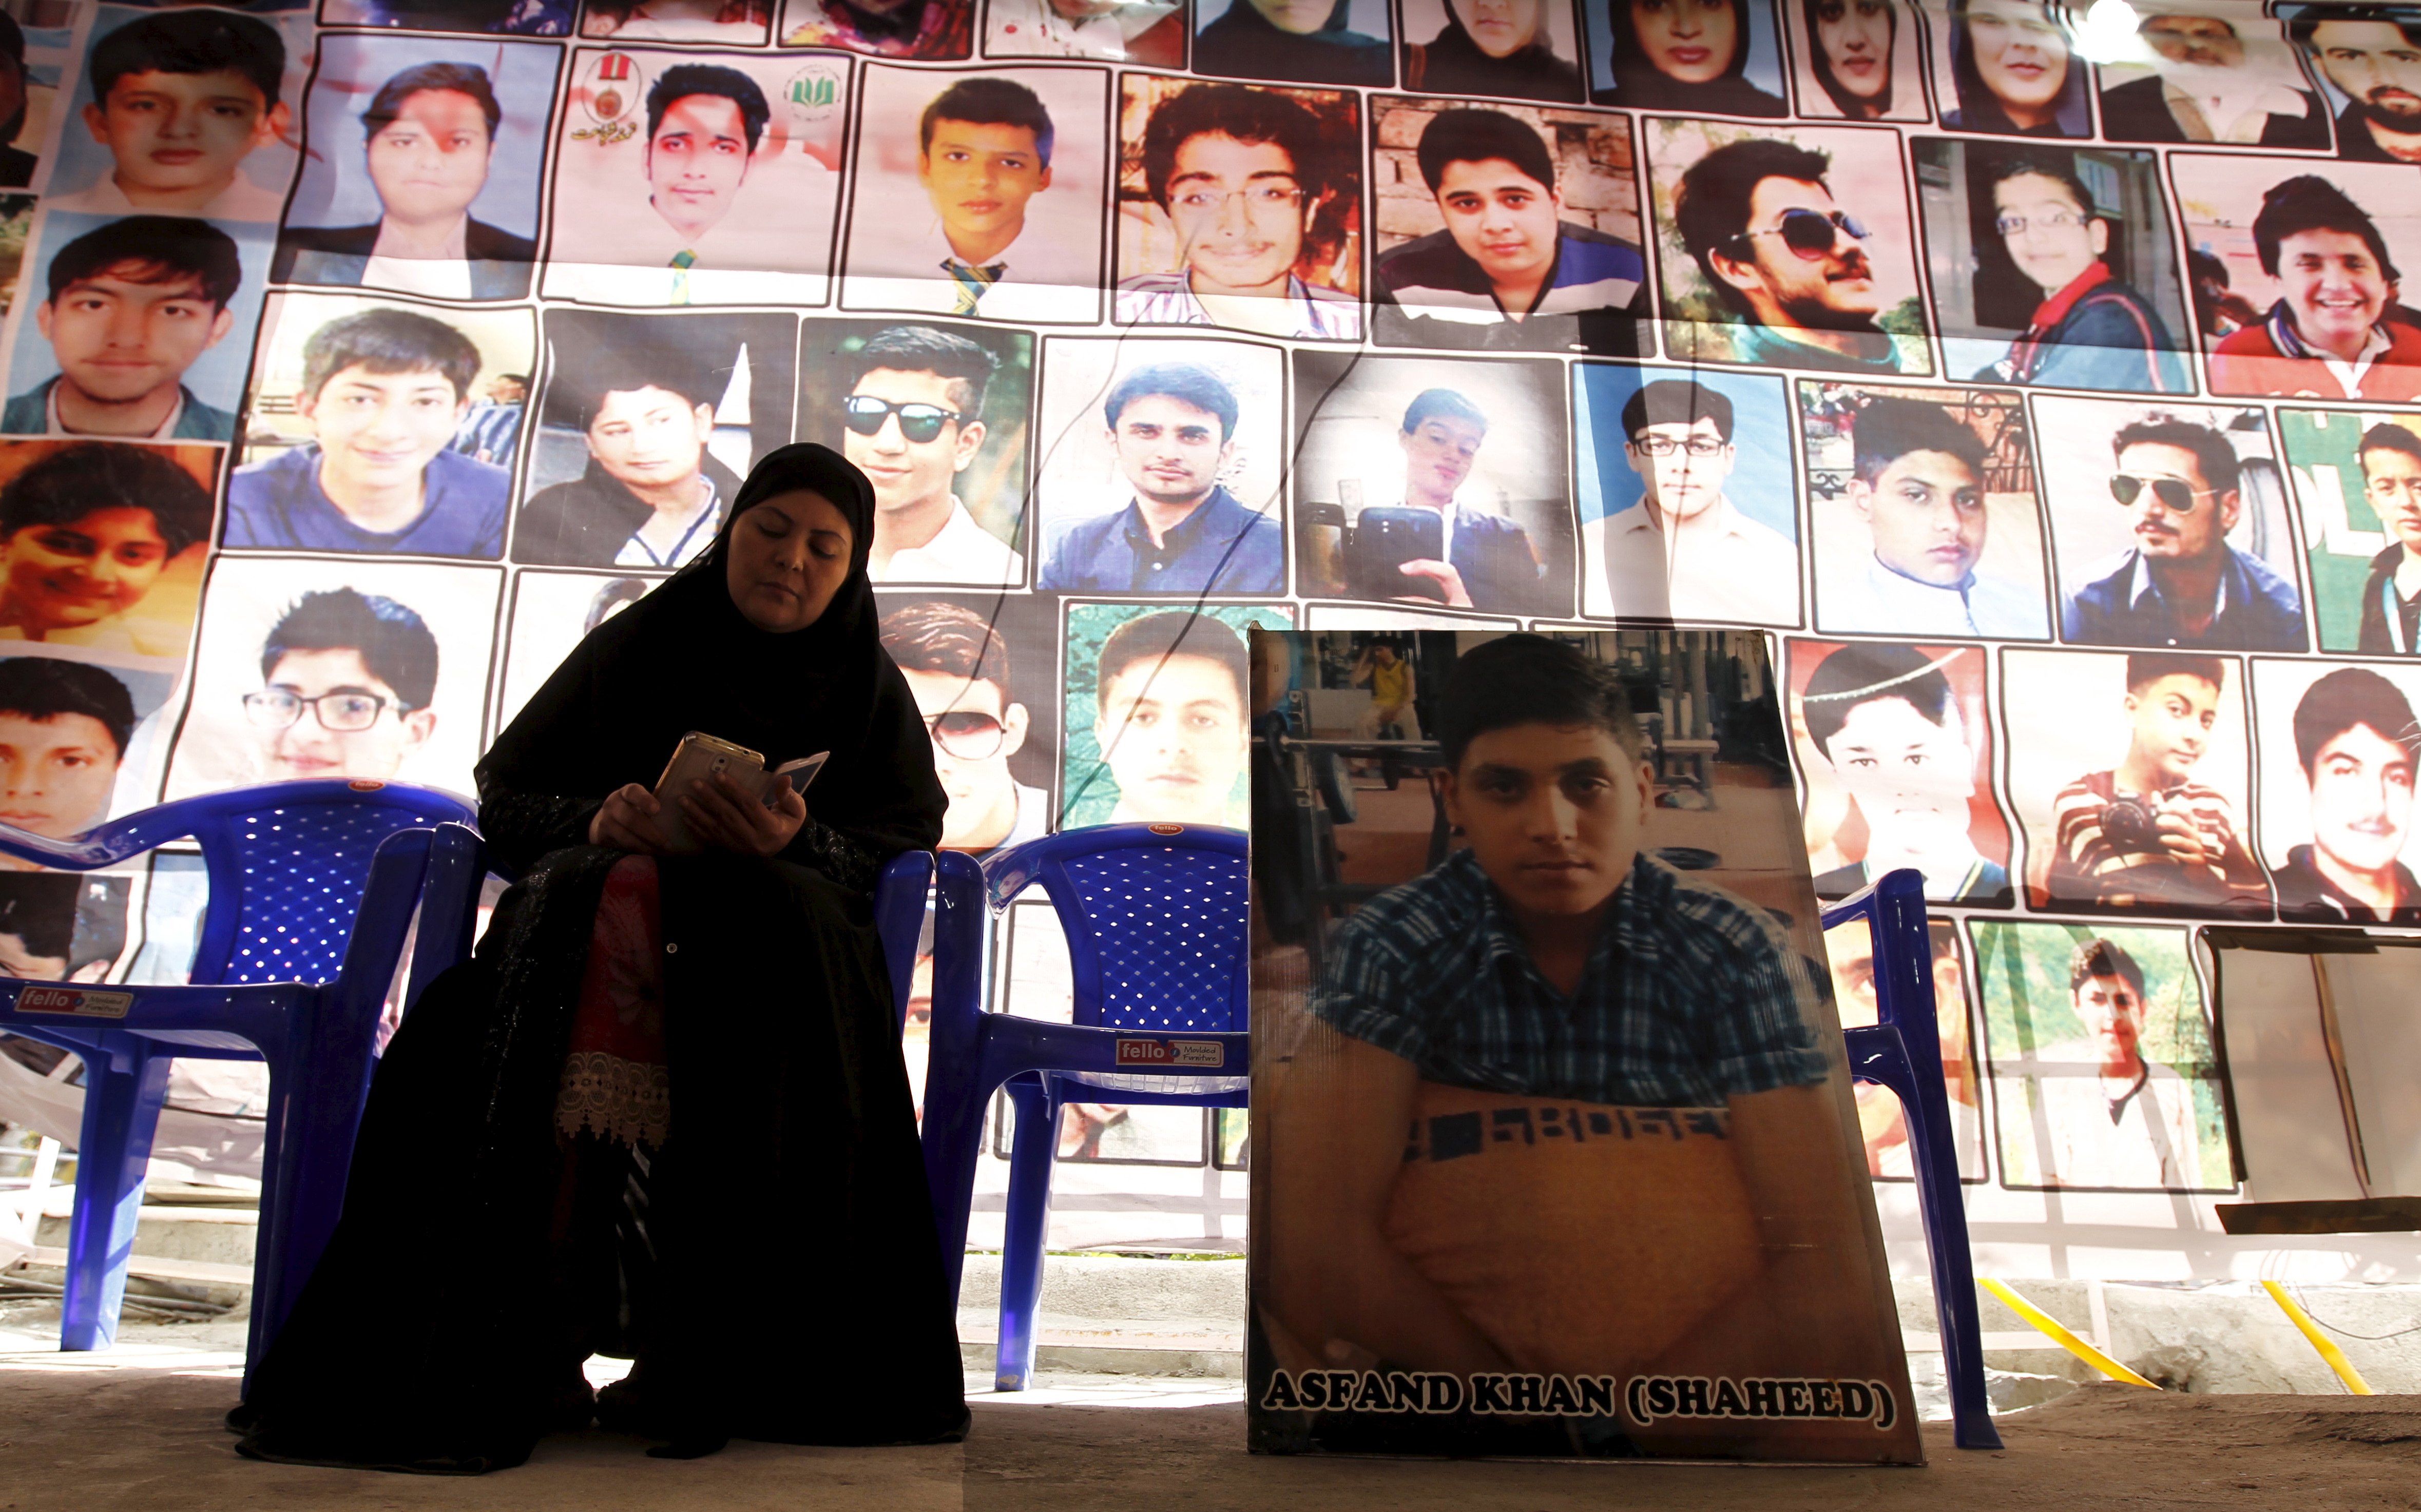 Shahana Ajoon, mother of Asfand Khan, sits beside a picture of her son in Peshawar, Pakistan, on Dec. 11, 2015. The family of Hassan Zeb have created a rooftop shrine for their son covered with pictures of the 134 students and 16 staff killed in the Taliban attack on the Army Public School in Peshawar (Caren Firouz—Reuters)